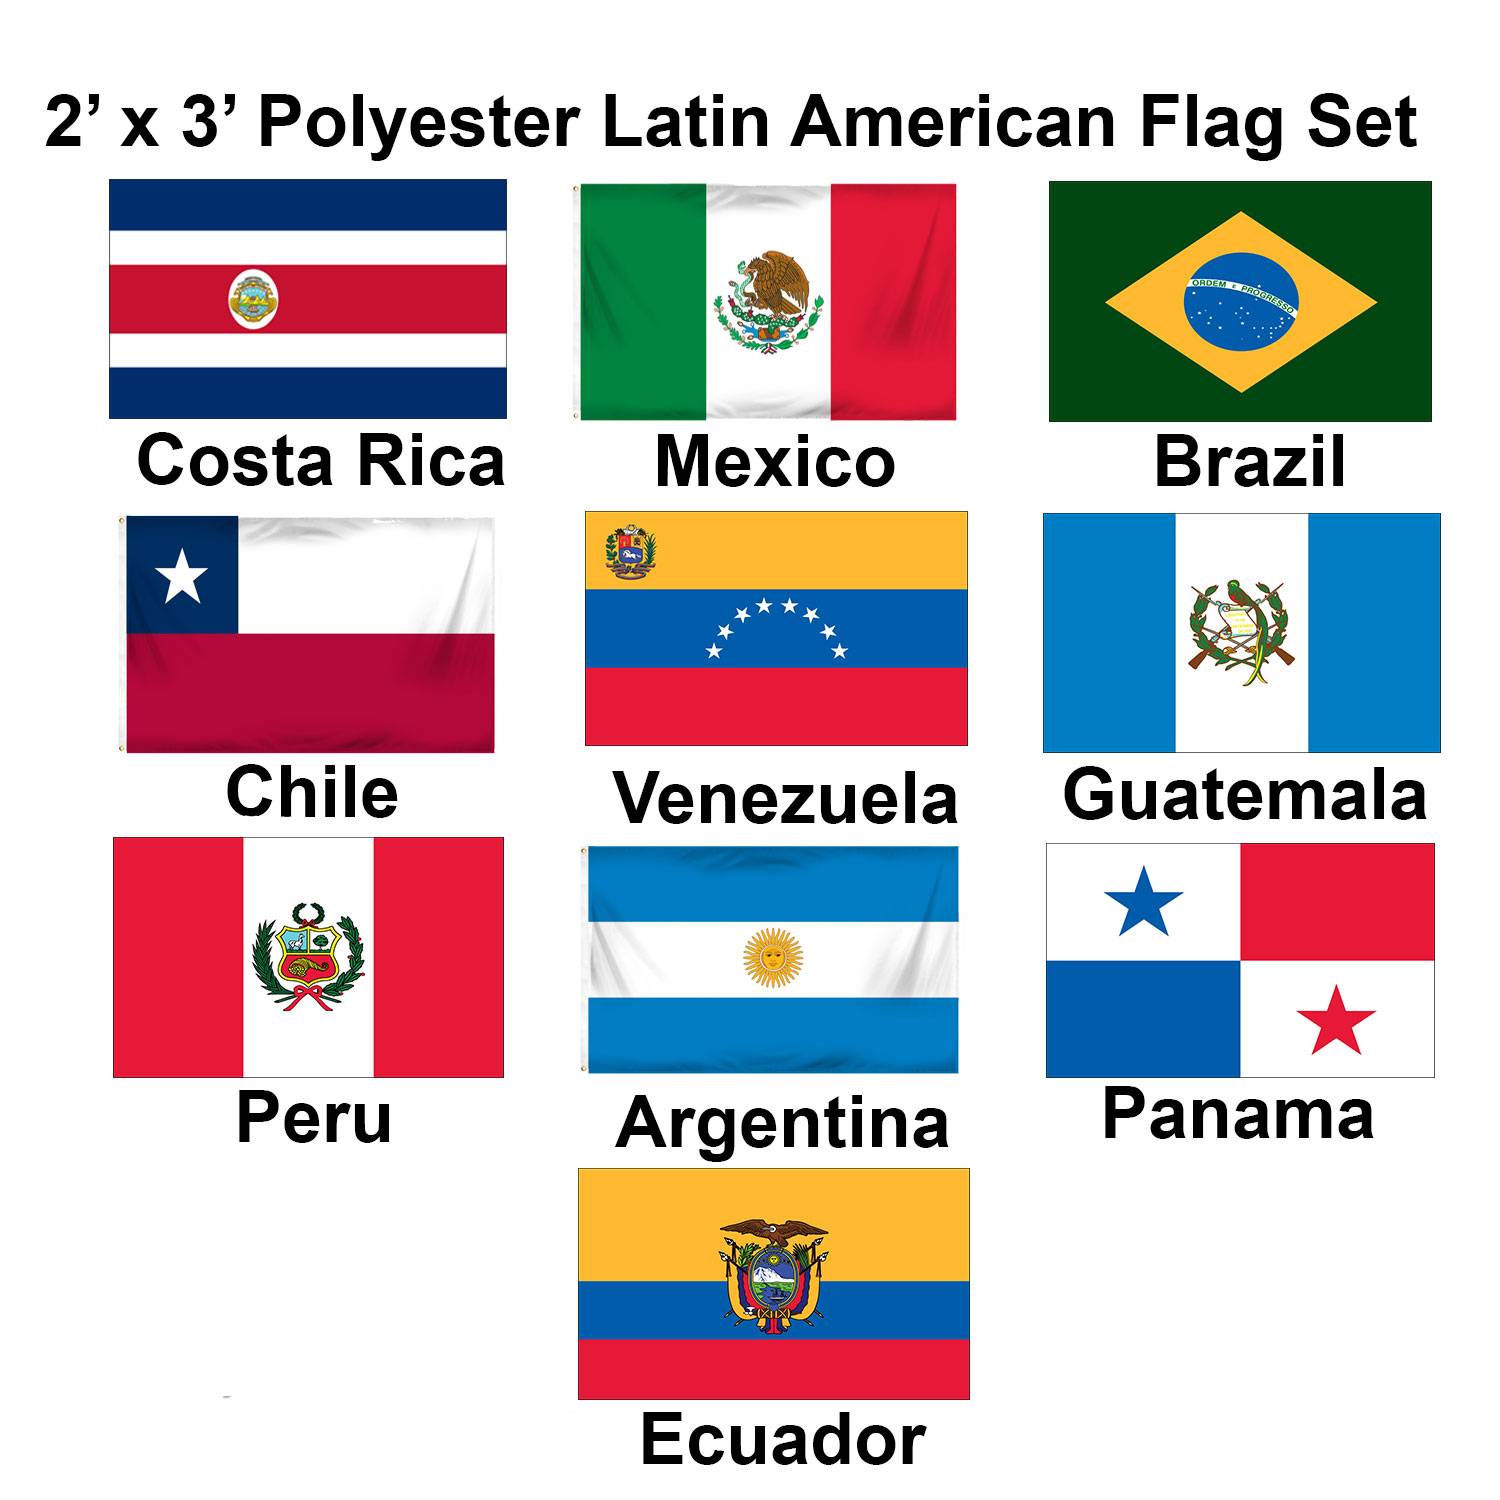 2-x-3-set-of-10-latin-american-flags-set-1-1-800-flags